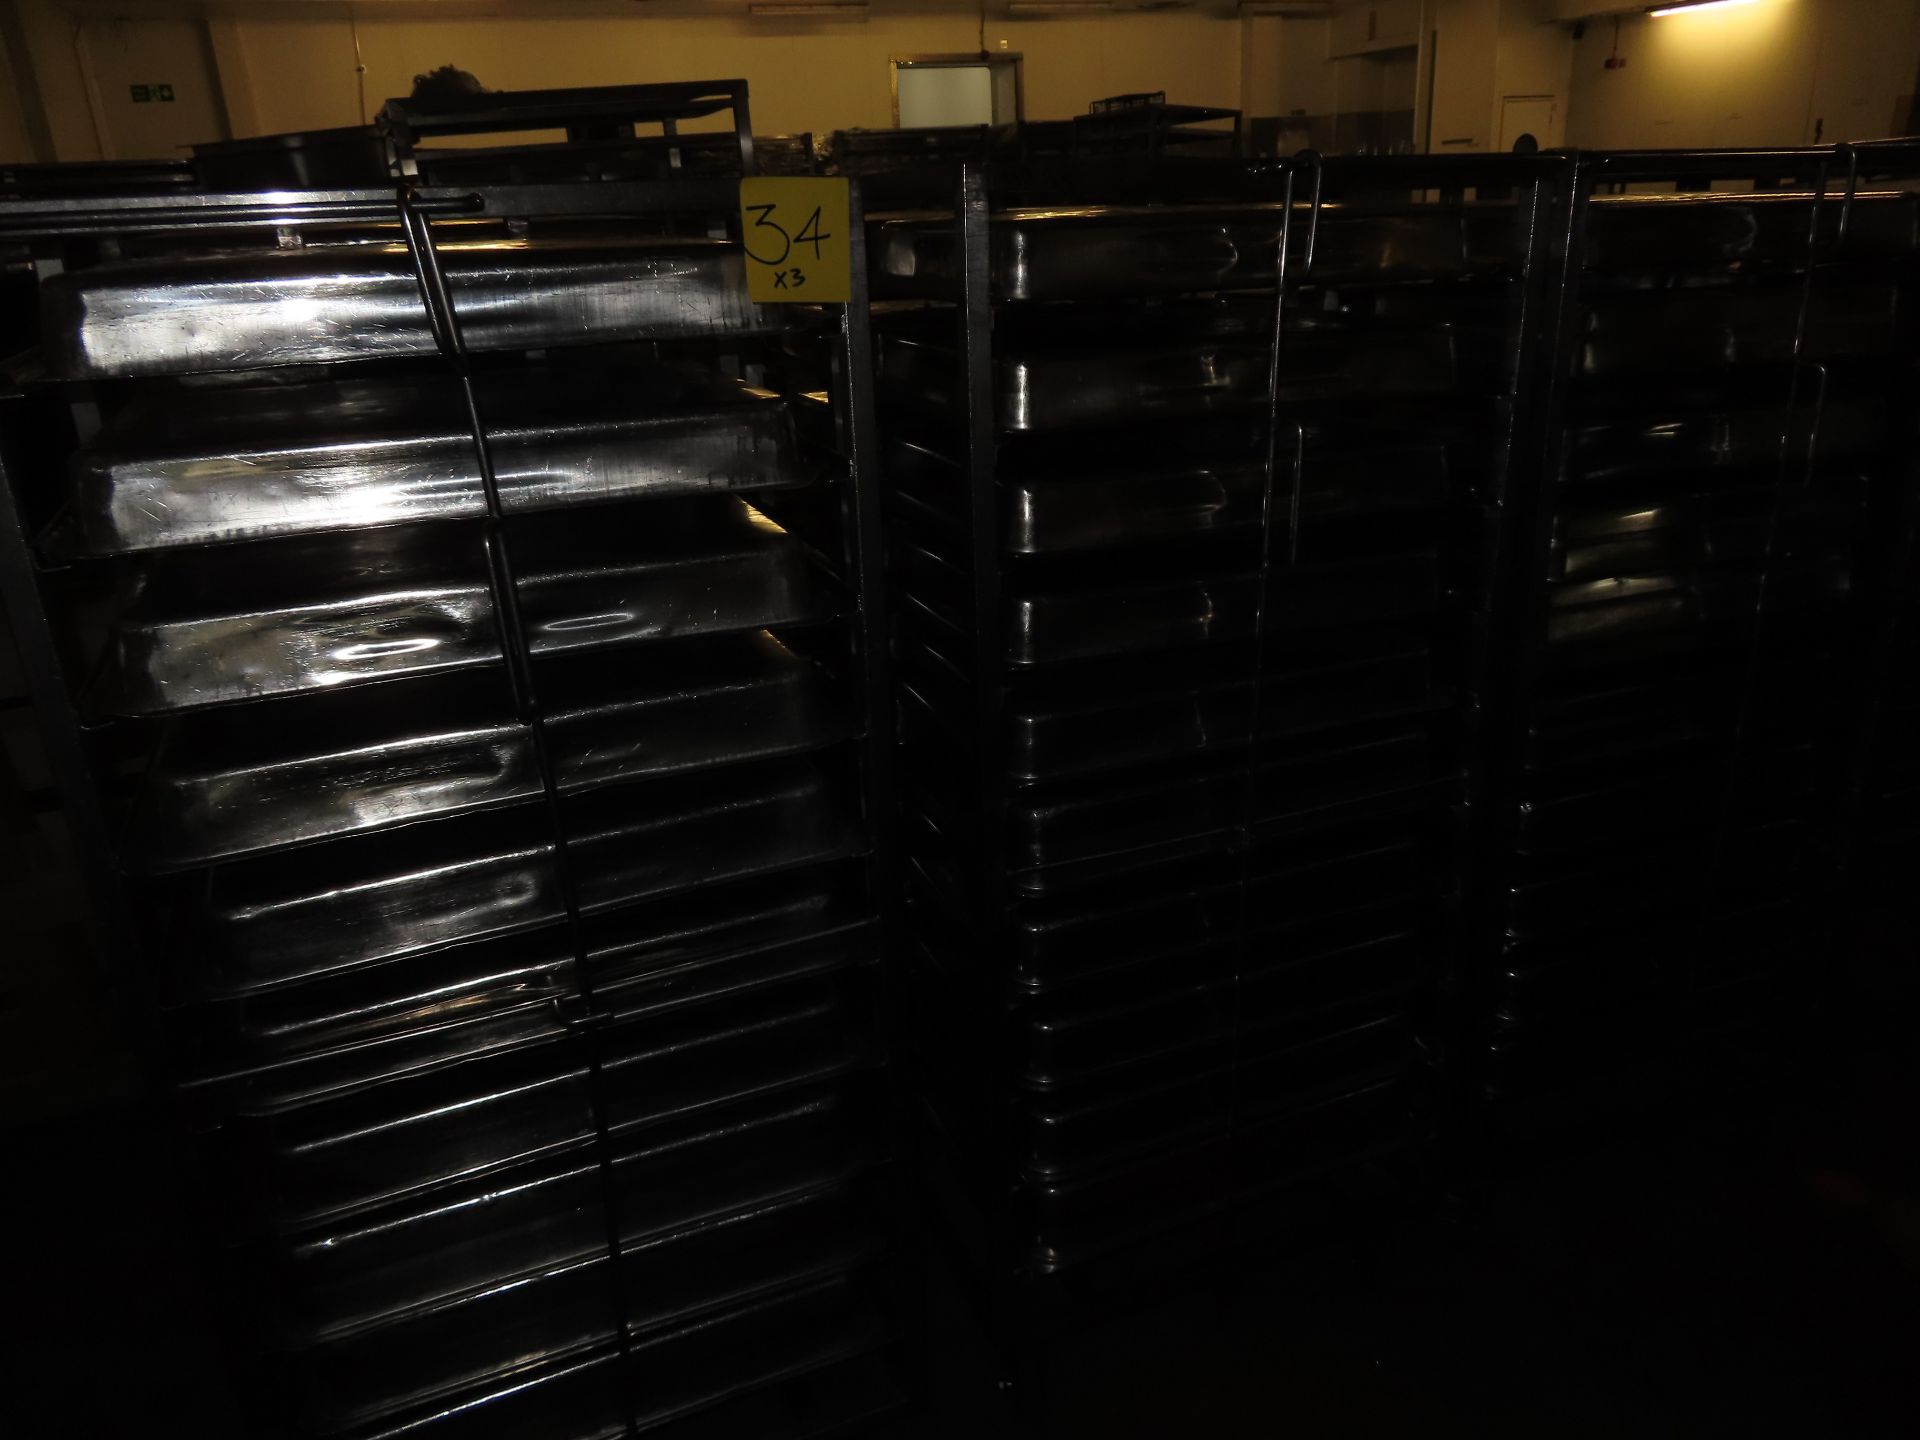 3 X S/s DOUBLE TROLLEYS WITH 60 TRAYS. - Image 4 of 4